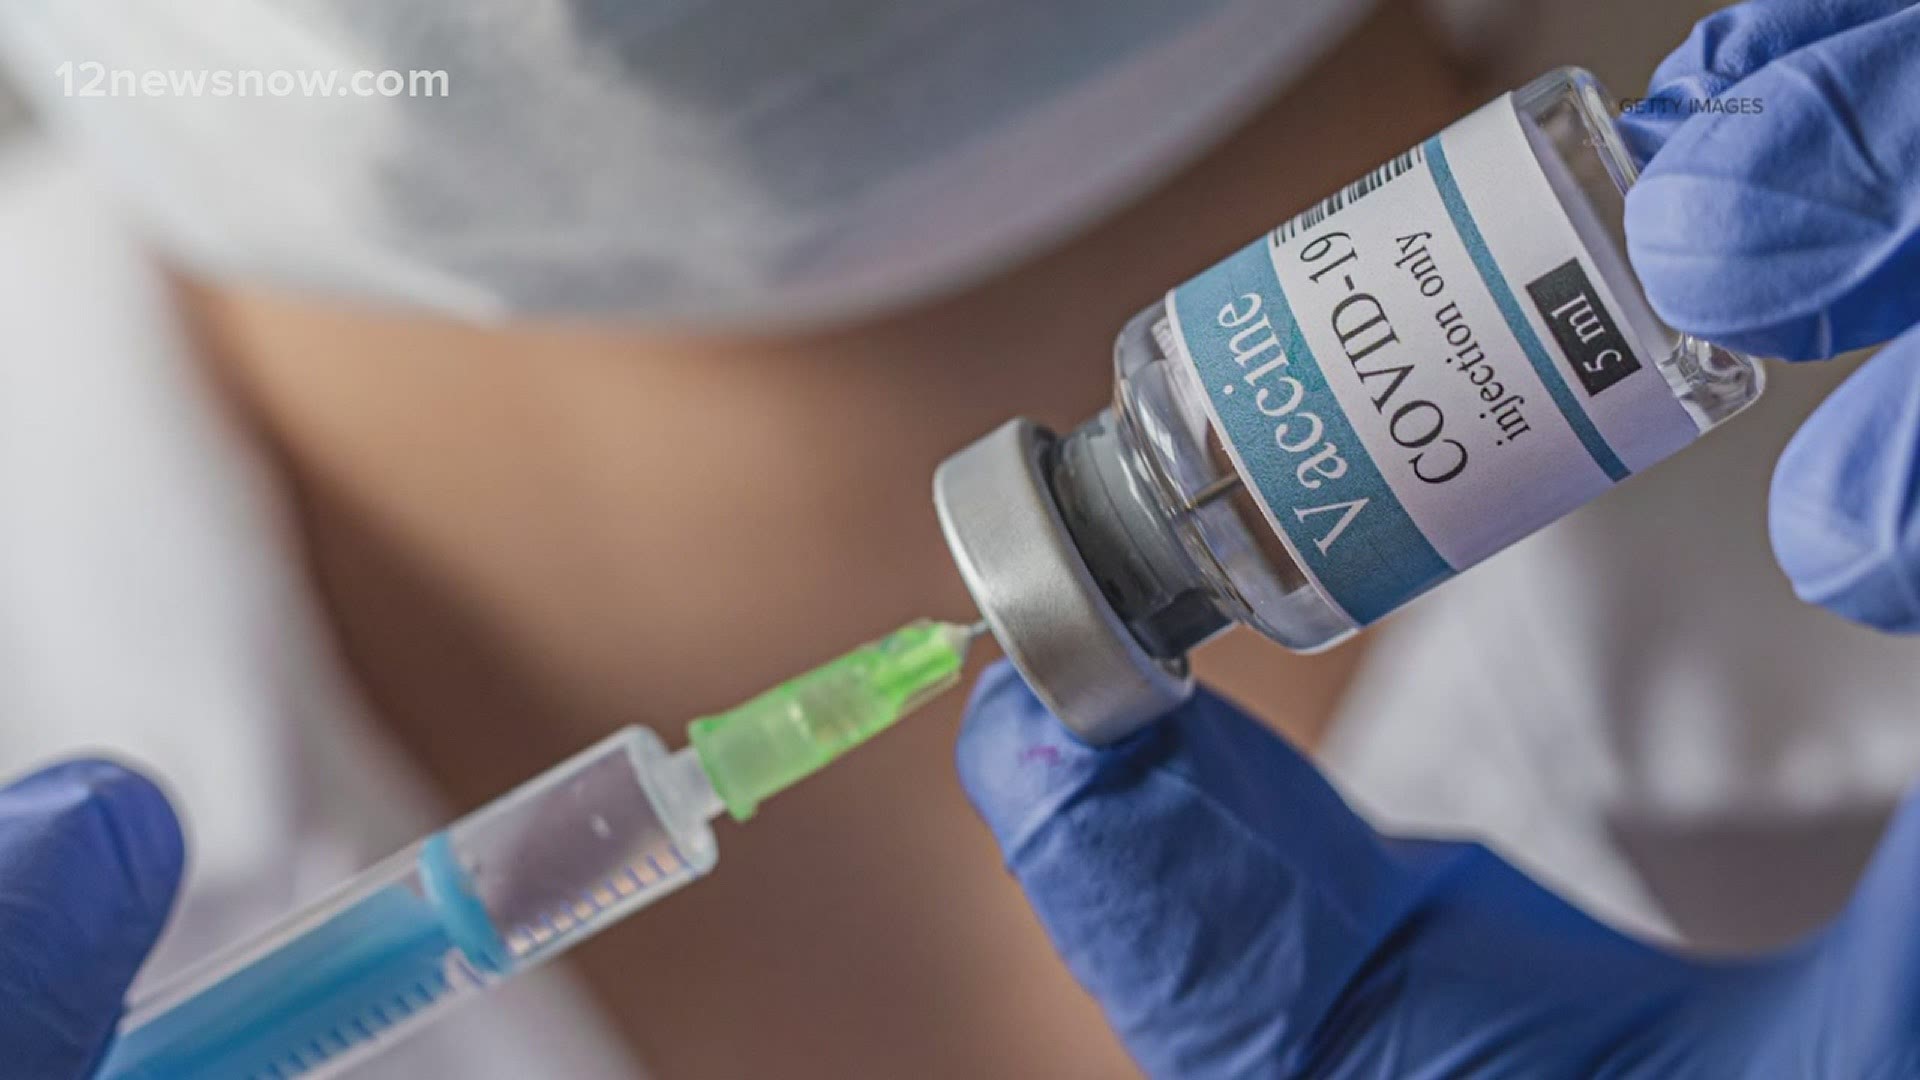 Some people are wondering if they should try to use more than one vaccine once they are approved